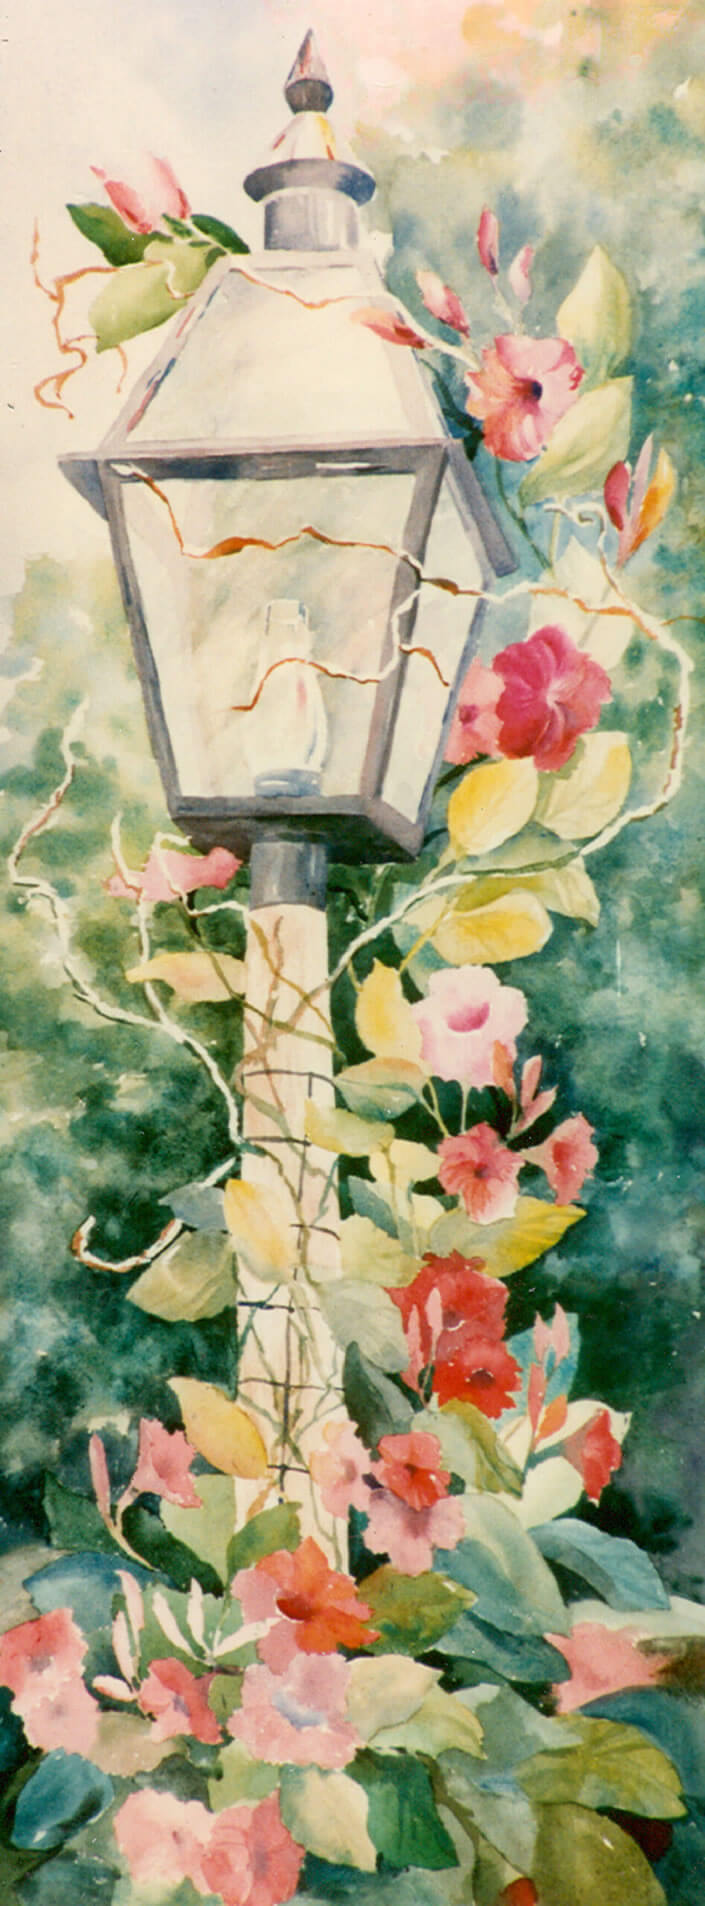 Watercolor Painting Kentucky Lamppost by Pam Smyth